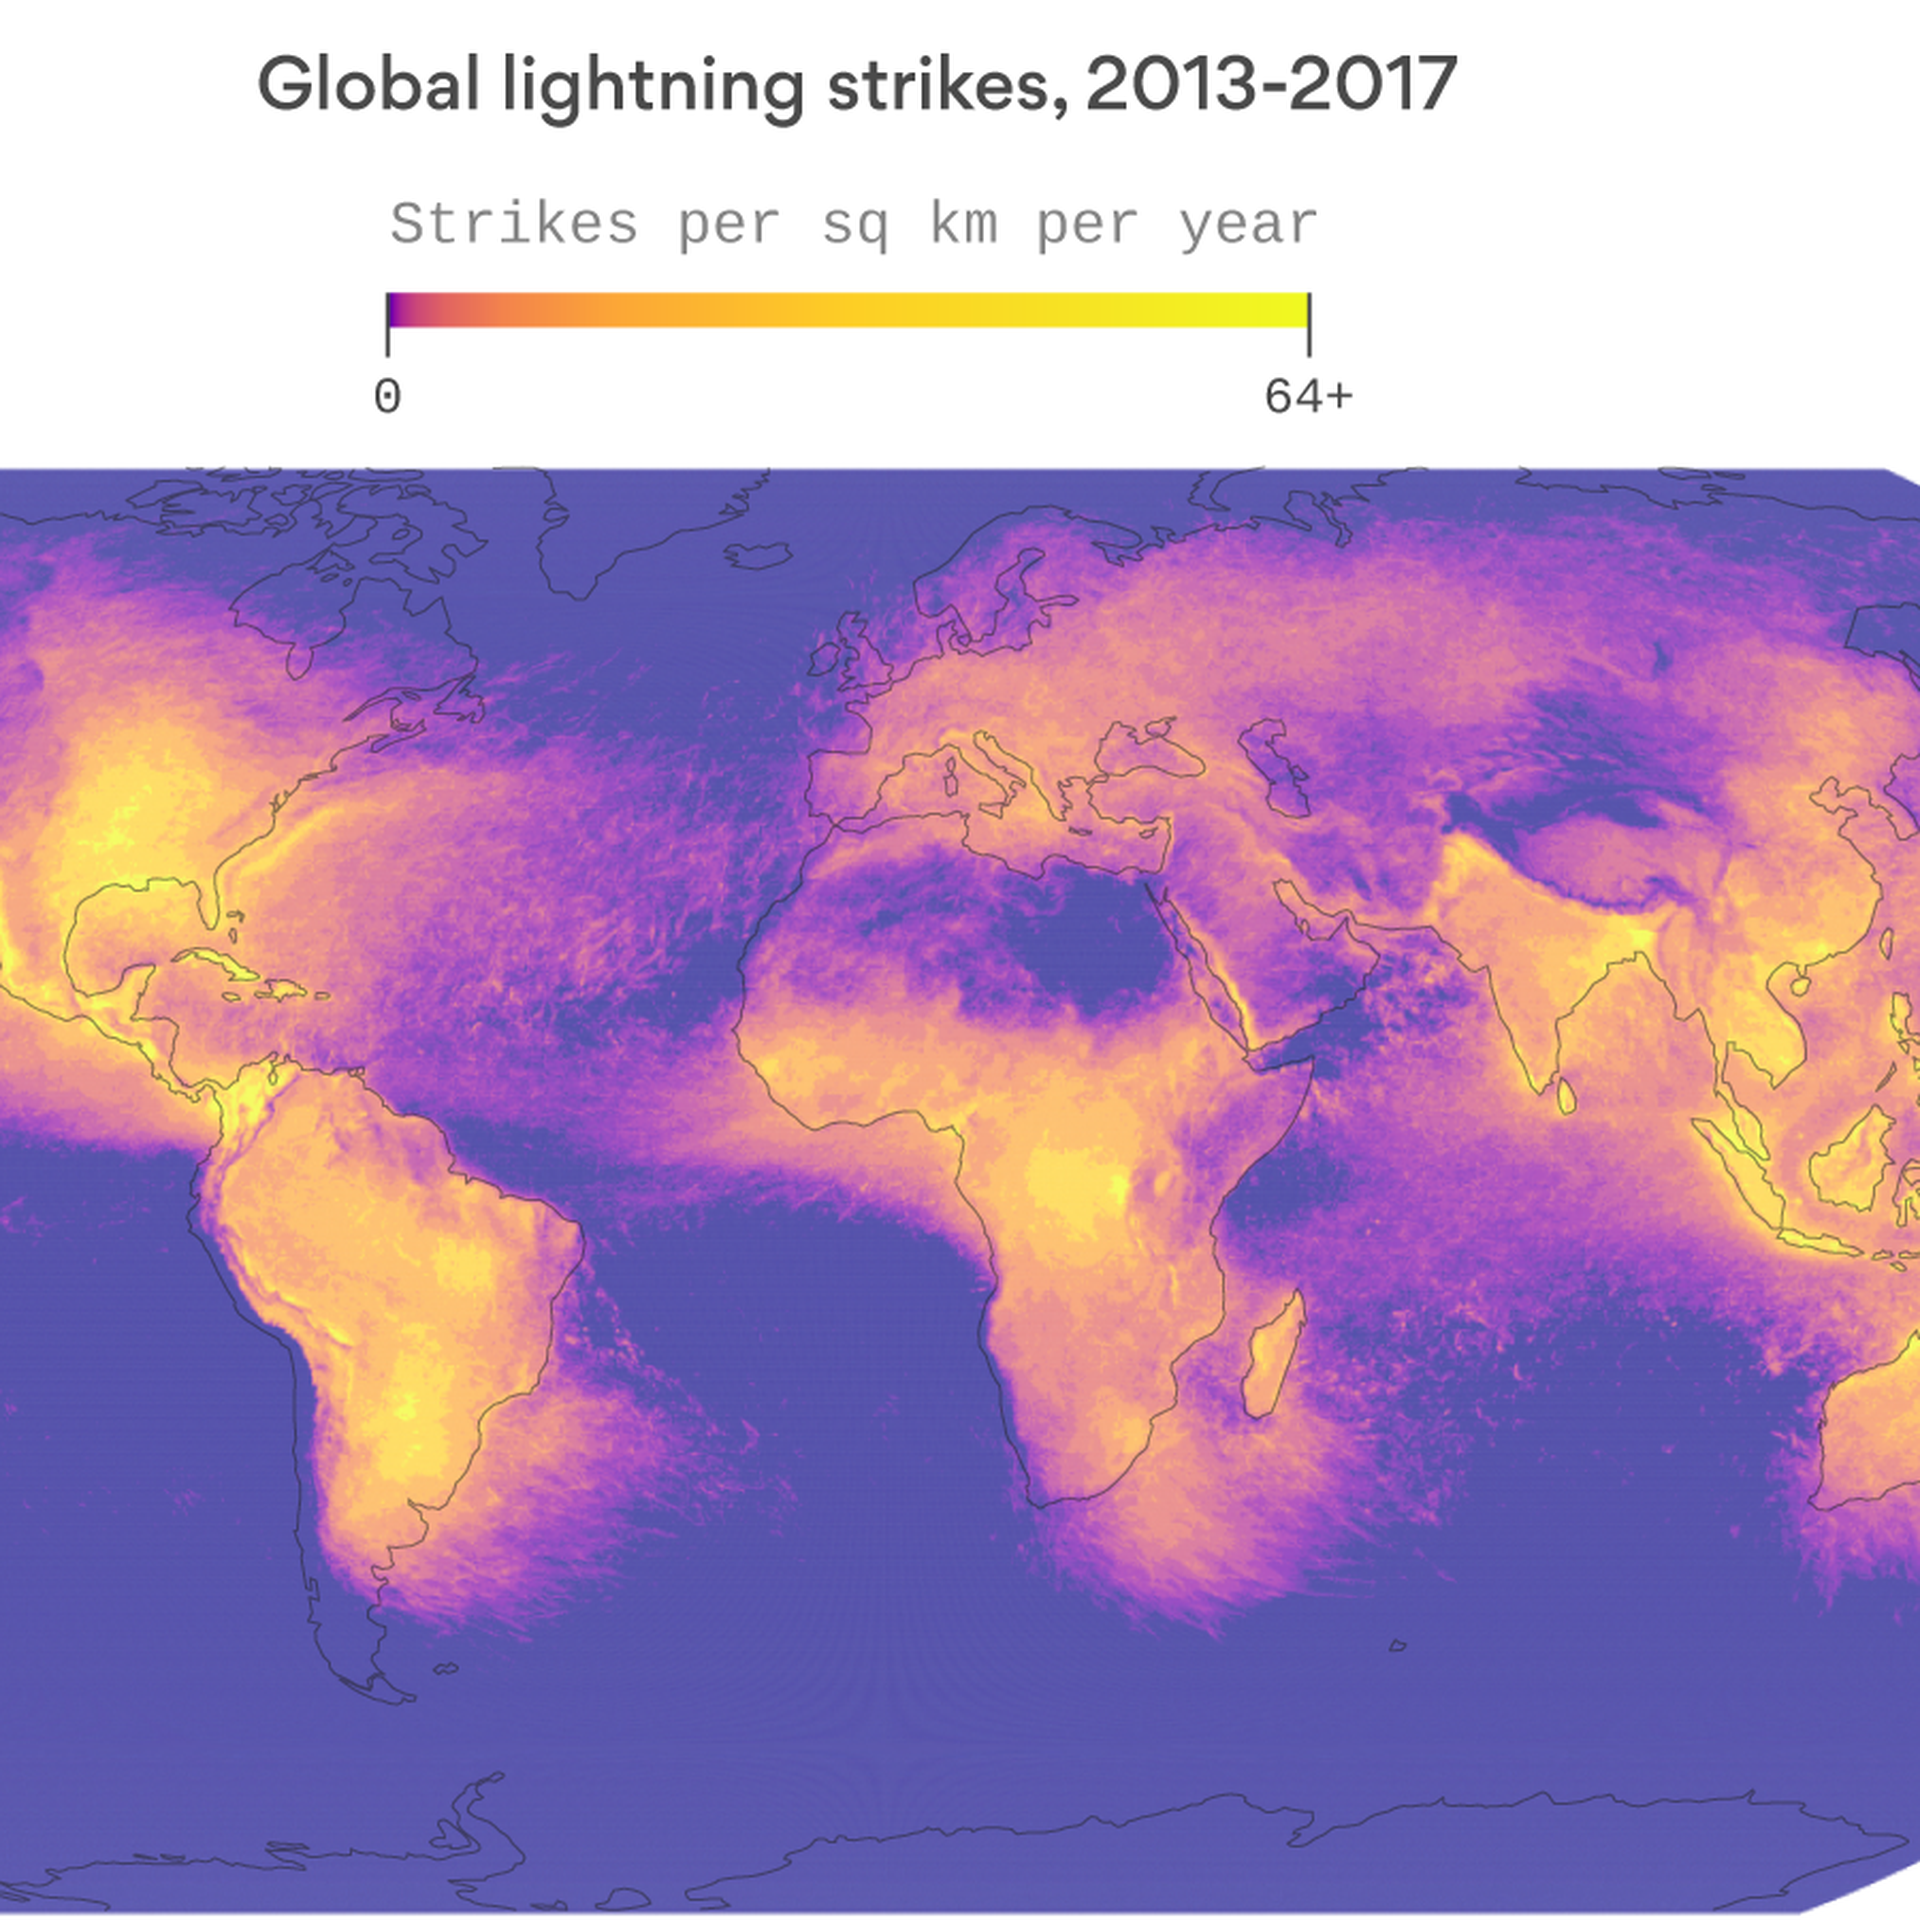 This rotating map shows nearly 9 billion lightning bolts